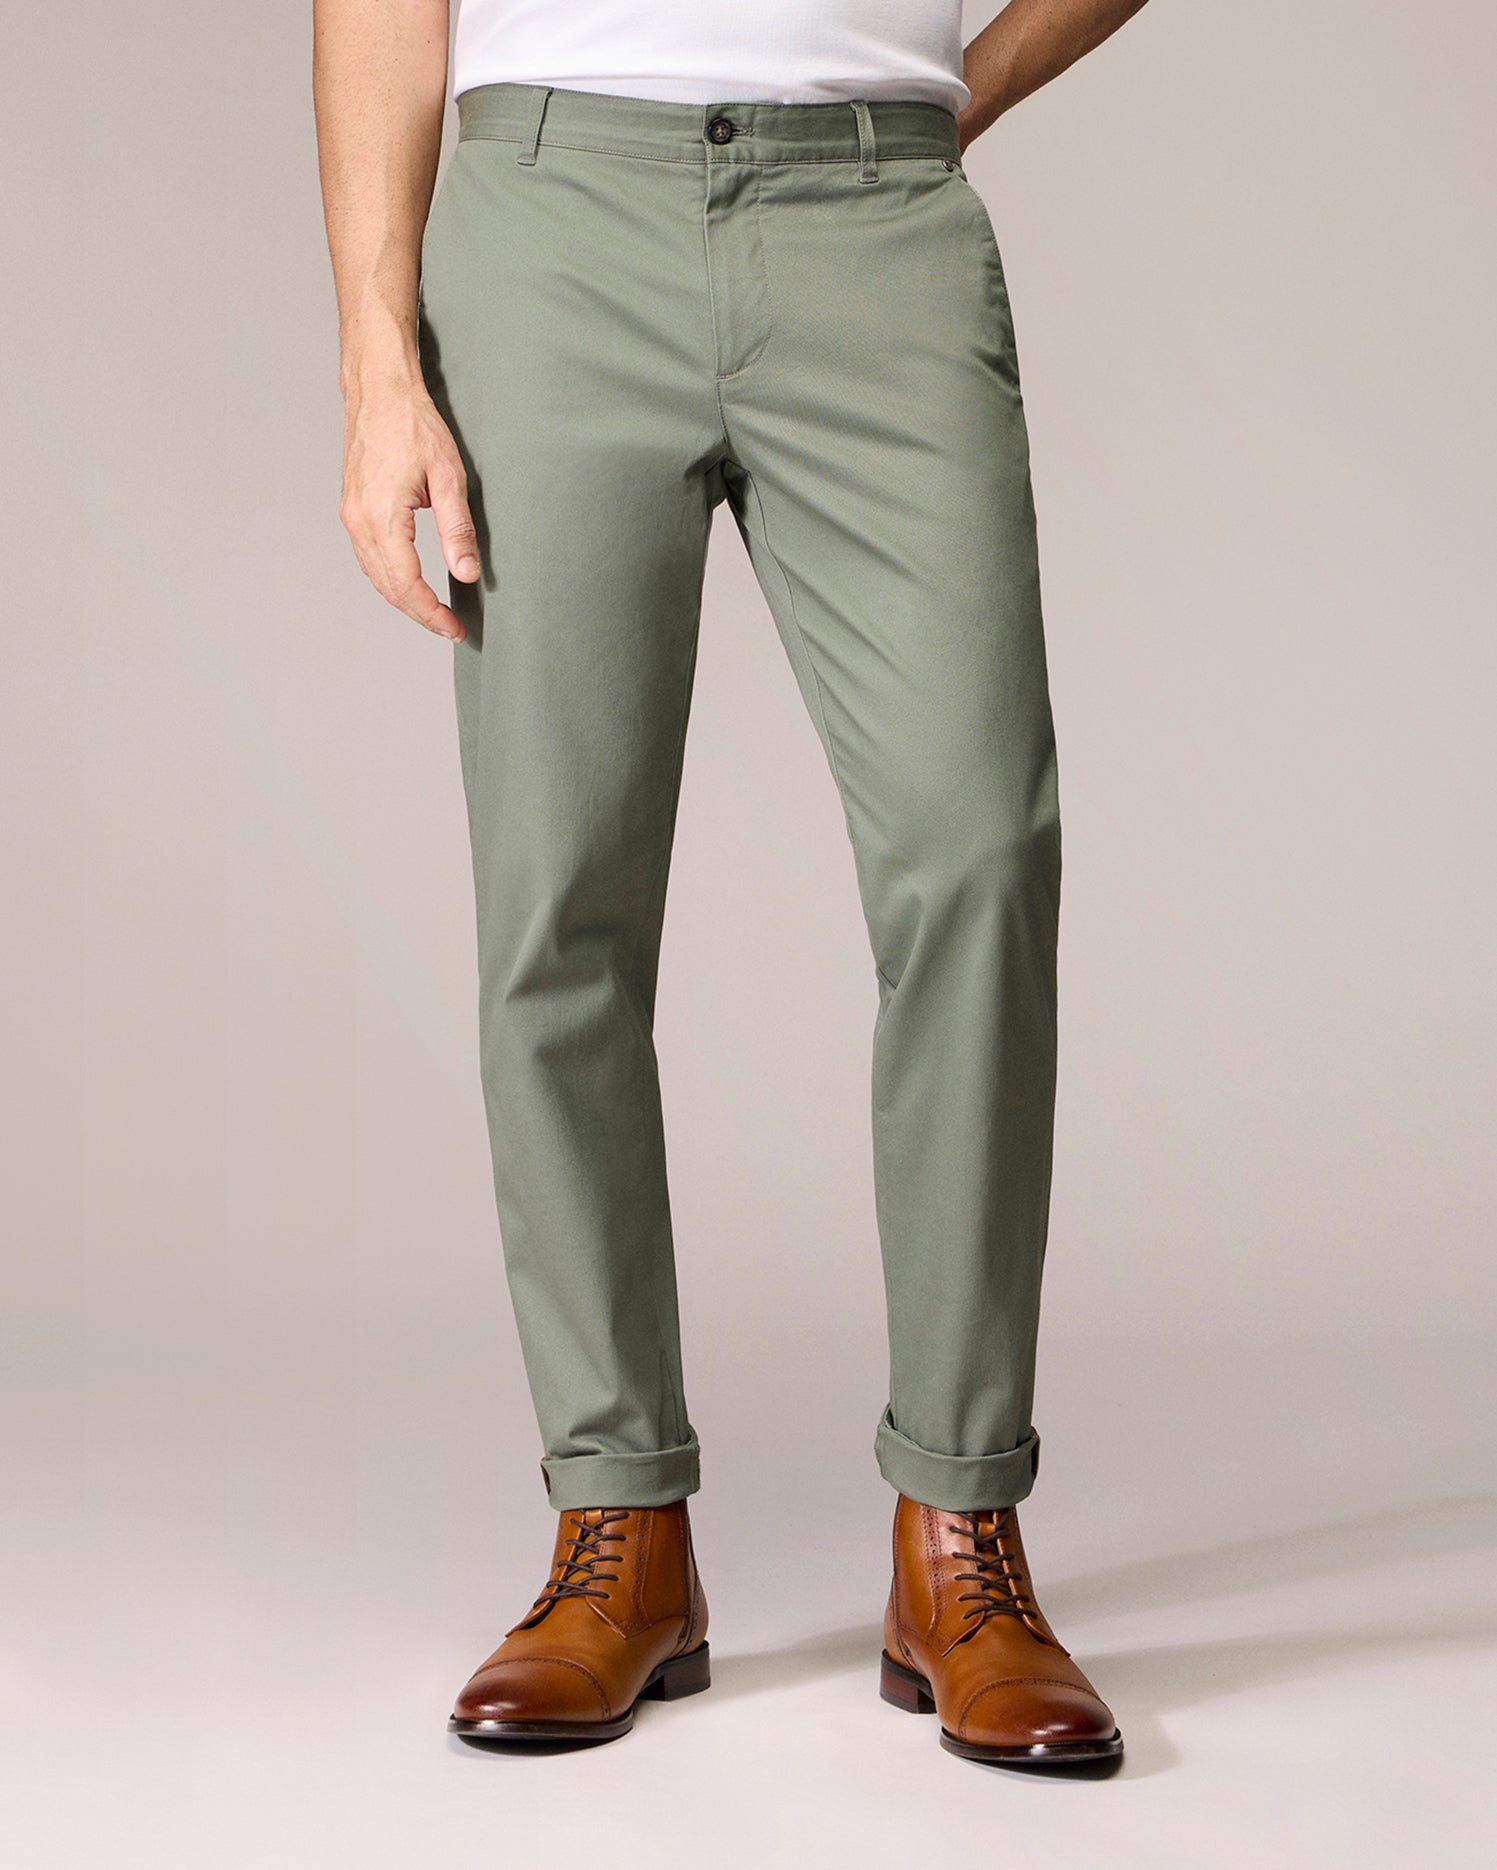 Psycho Bunny Chinos - Premium Comfort and Style in green